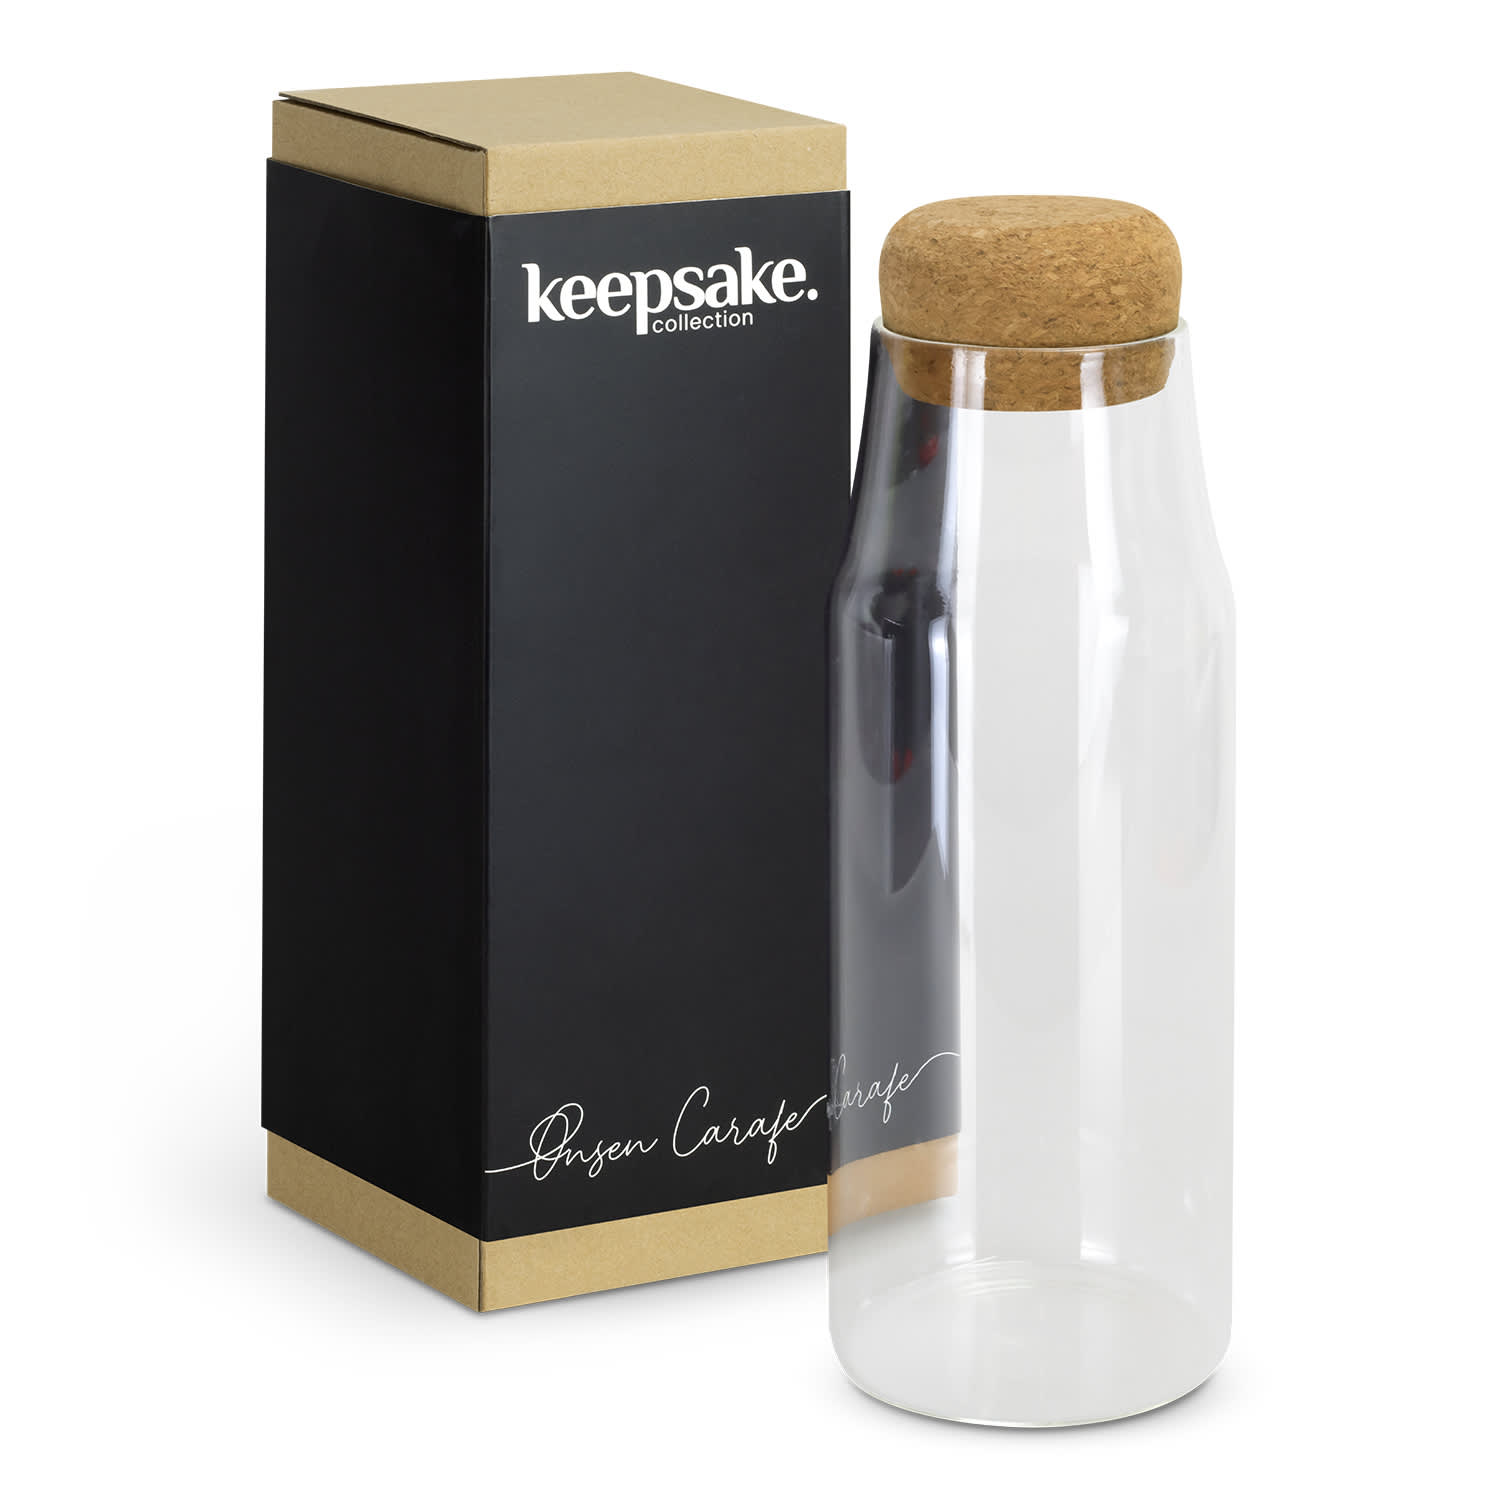 Keepsake Onsen Carafe | Glass Drink Bottle NZ | Glass Drink Bottle | Glass Water Bottle | Glass Water Bottle NZ | Glass Drinking Bottle | Custom Merchandise | Merchandise | Customised Gifts NZ | Corporate Gifts | Promotional Products NZ | Branded merch